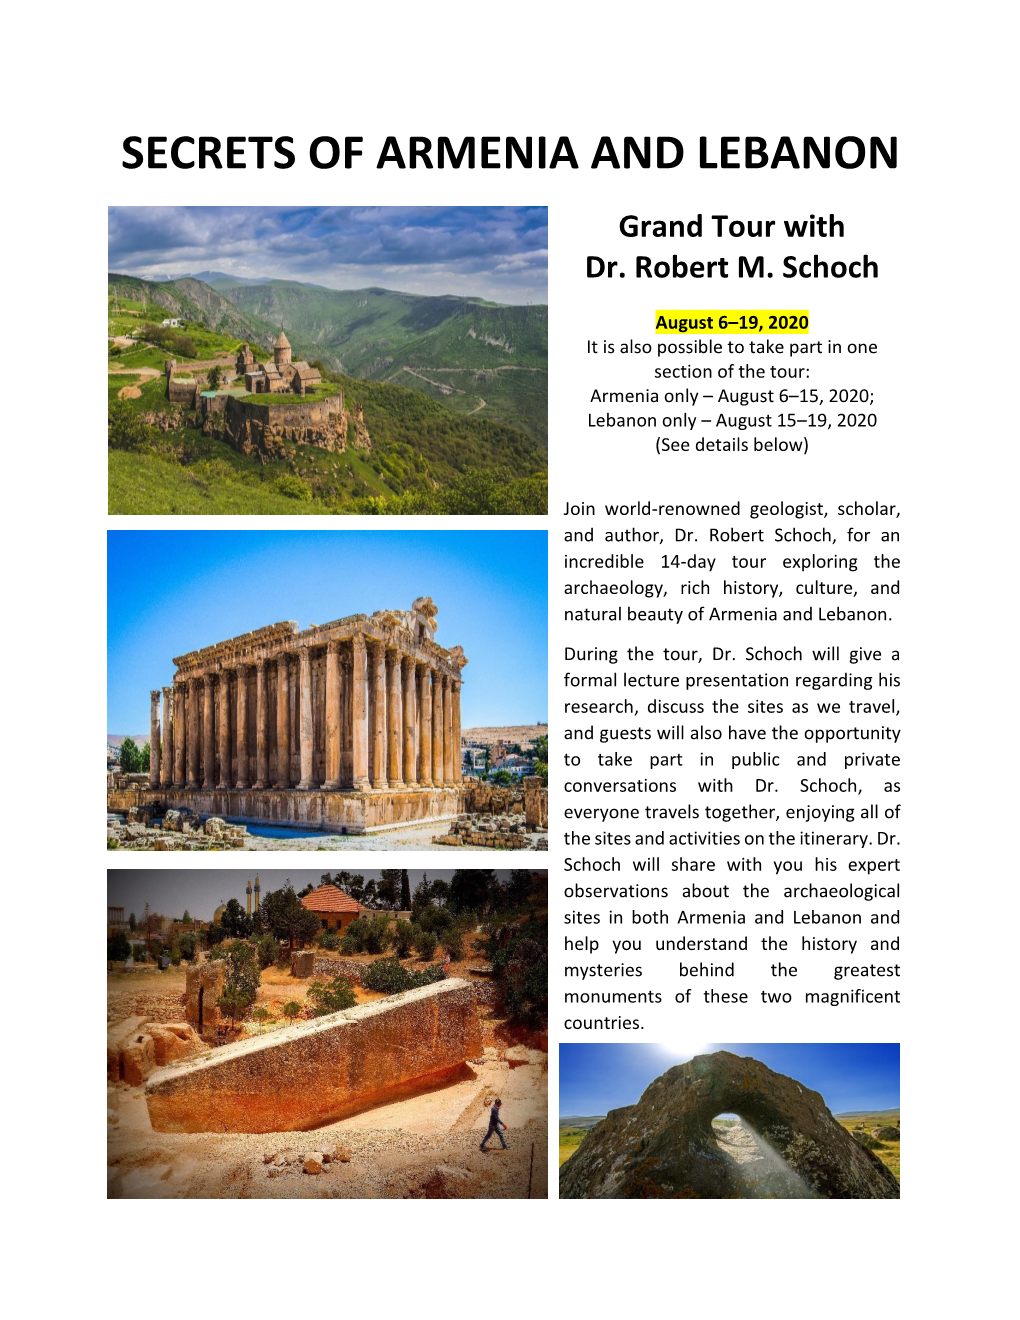 SECRETS of ARMENIA and LEBANON Grand Tour with Dr